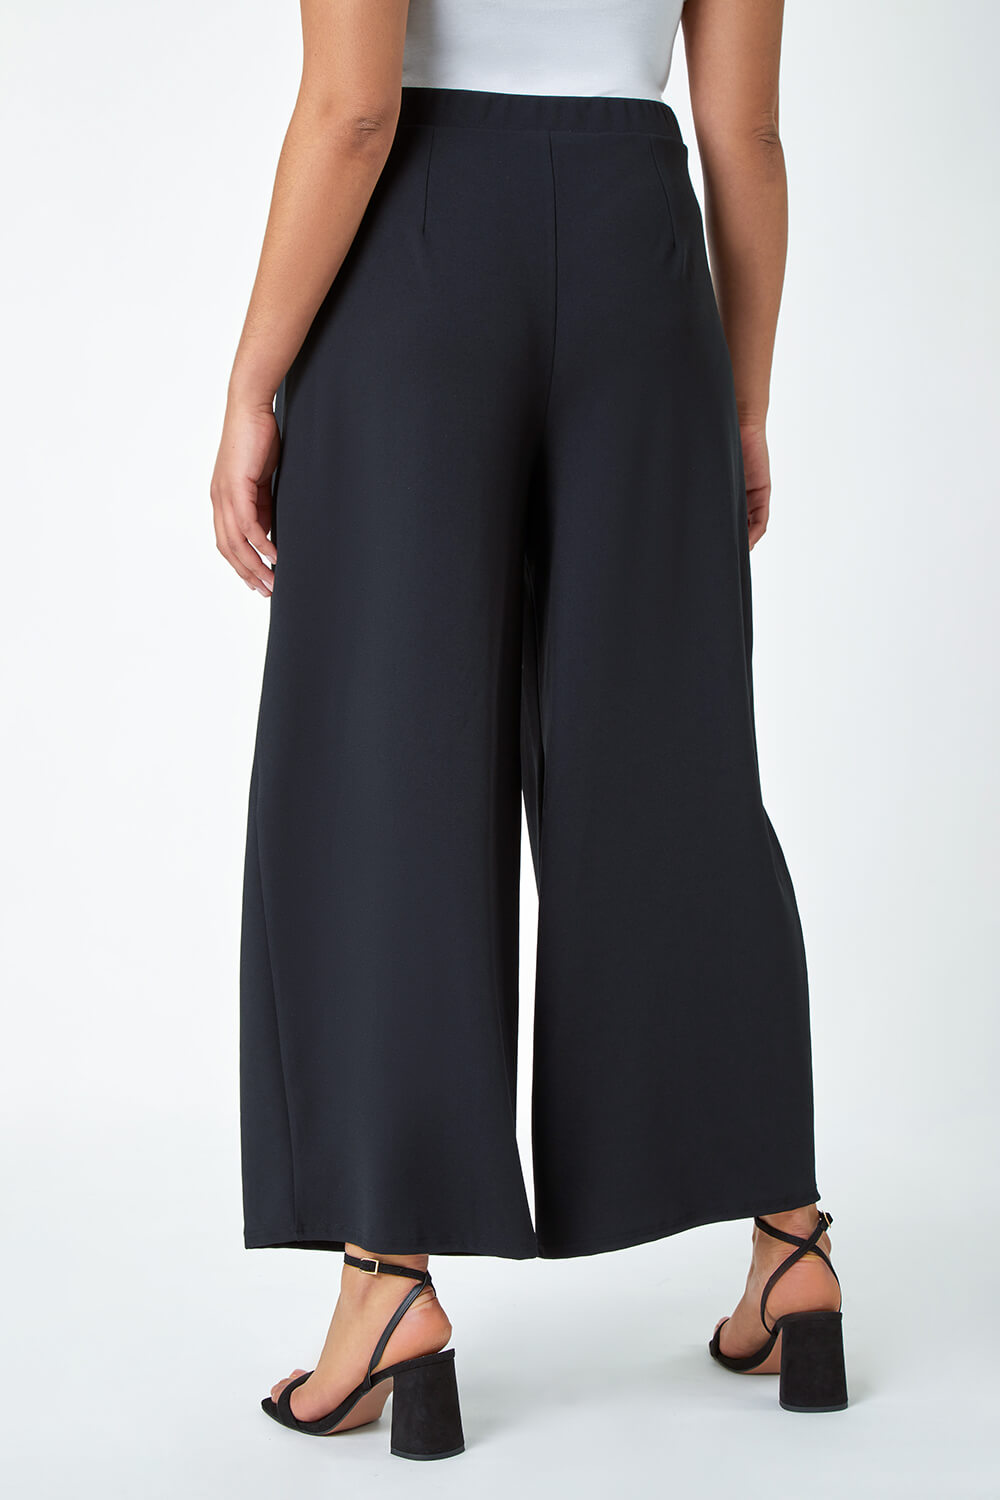 Black Curve Wide Leg Pleat Stretch Trousers, Image 3 of 5